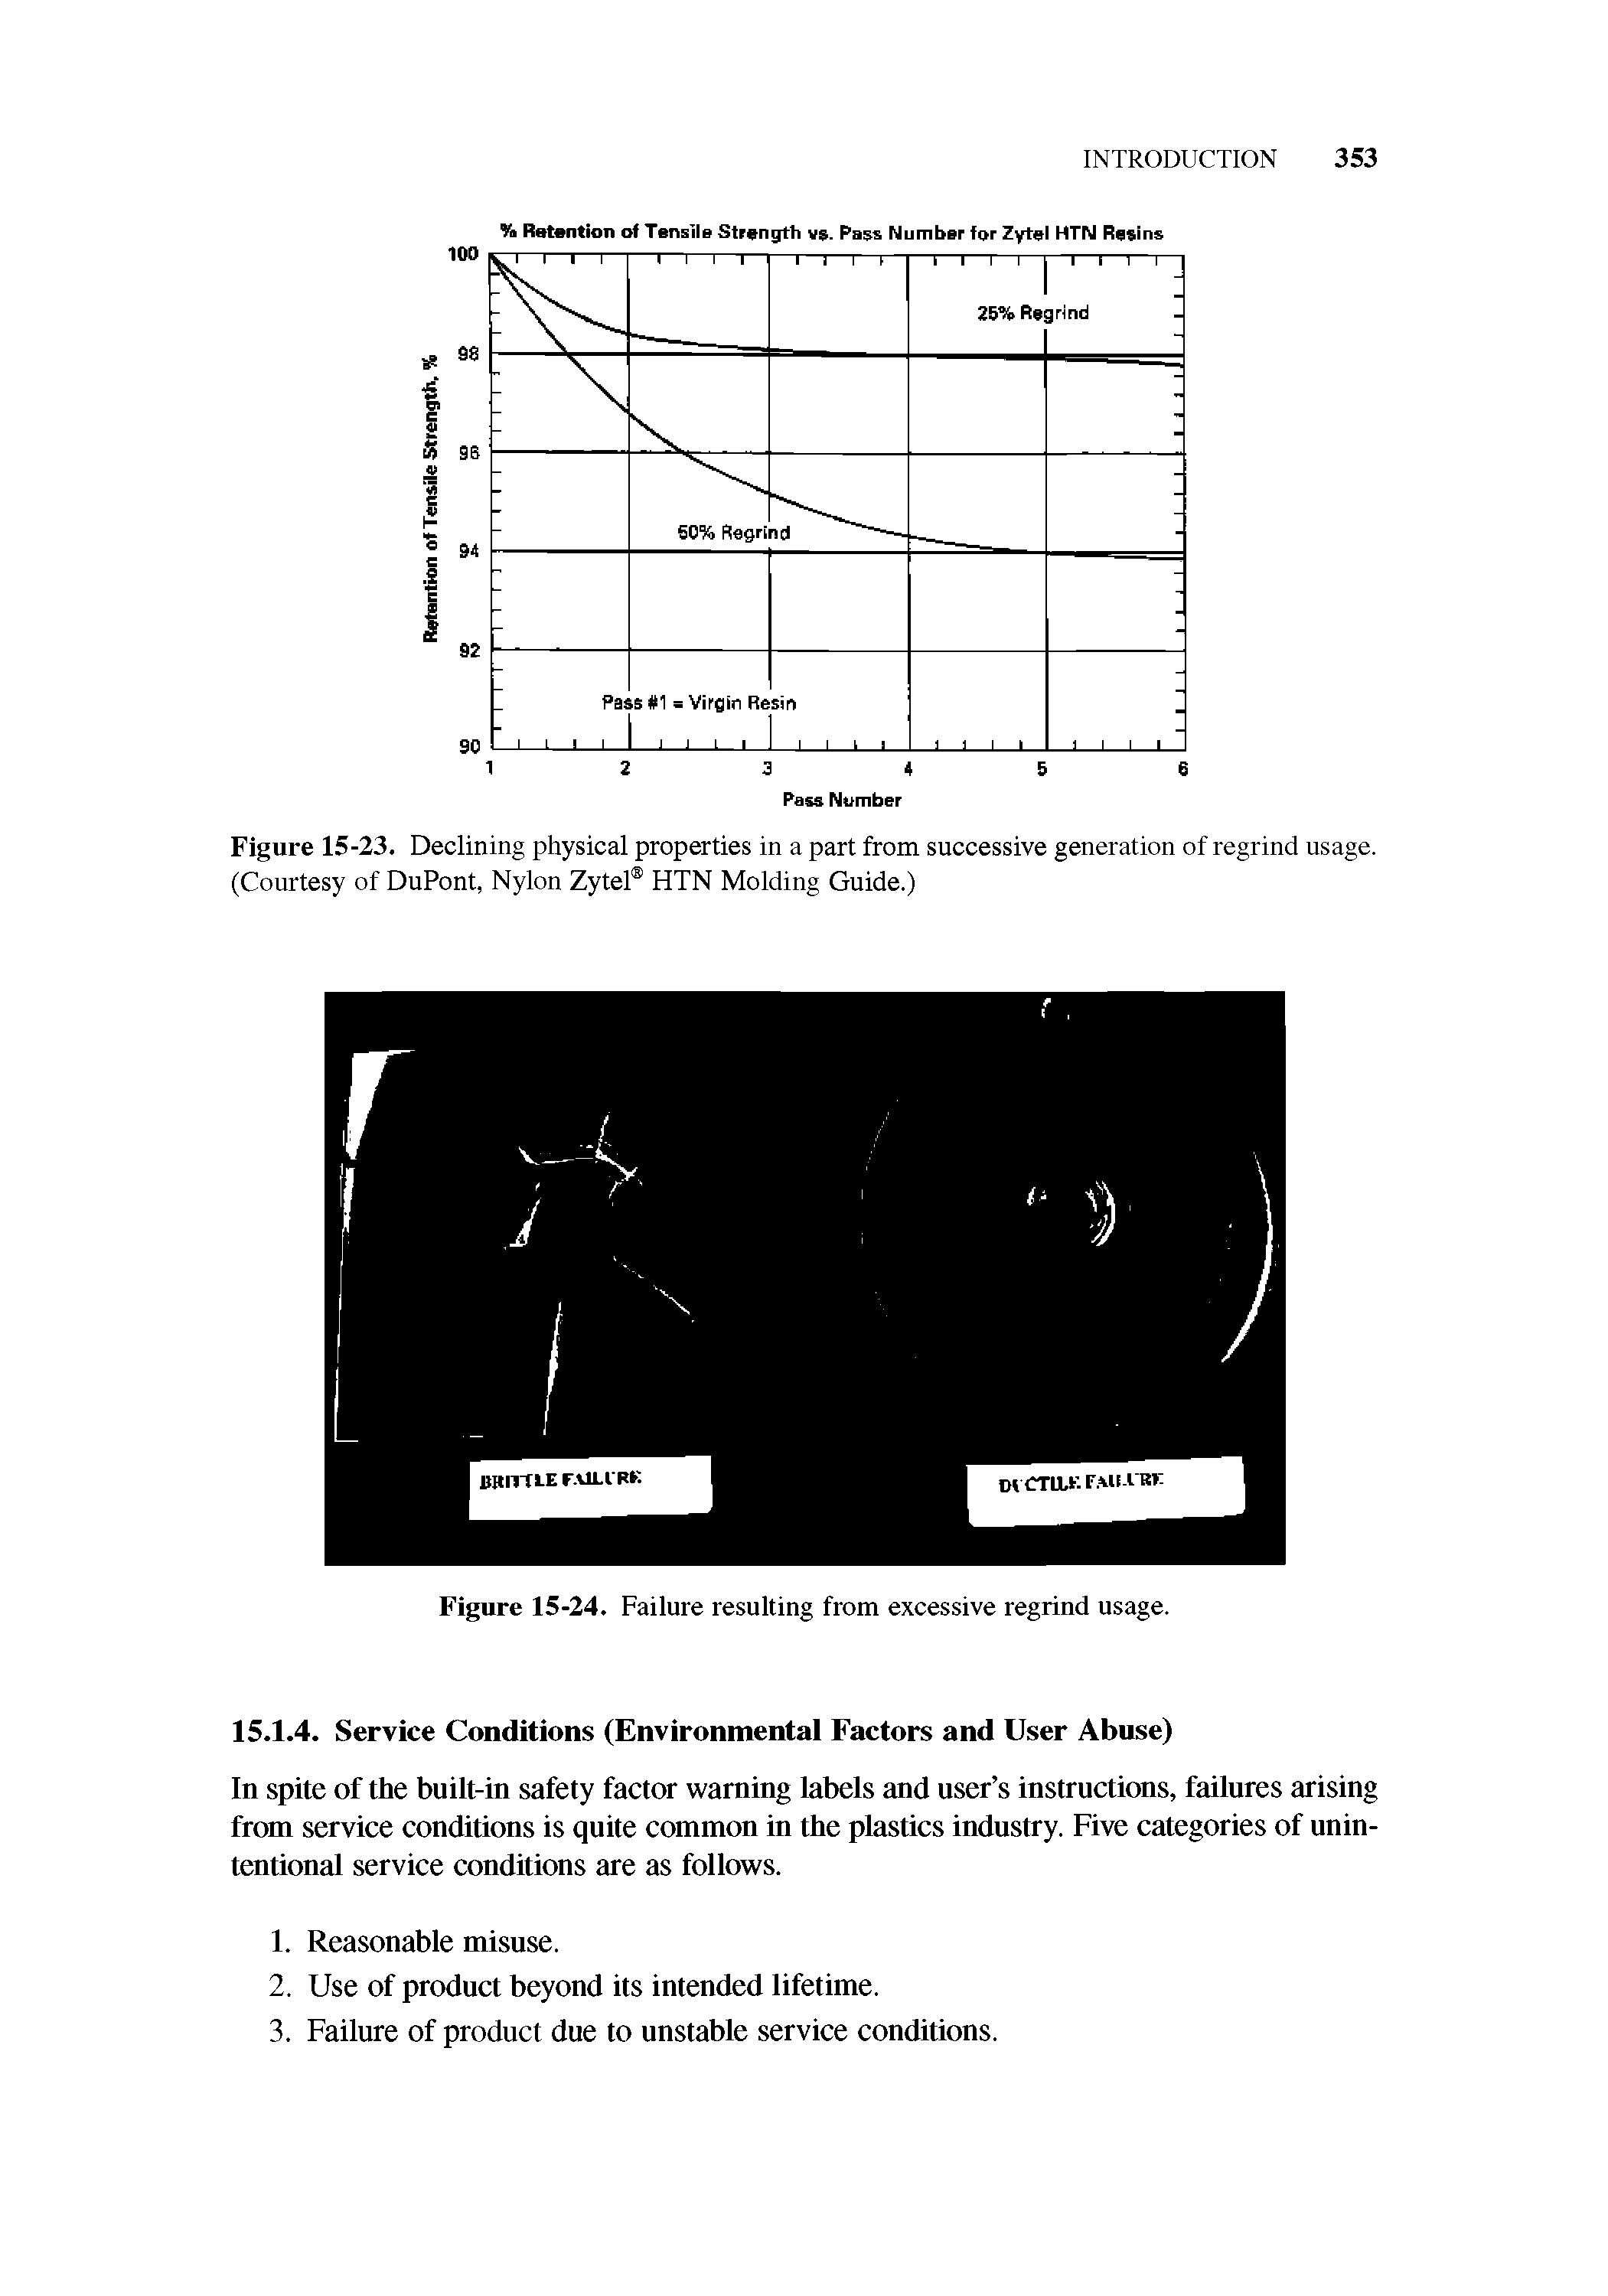 Figure 15-23. Declining physical properties in a part from successive generation of regrind usage. (Courtesy of DuPont, Nylon Zytel HTN Molding Guide.)...